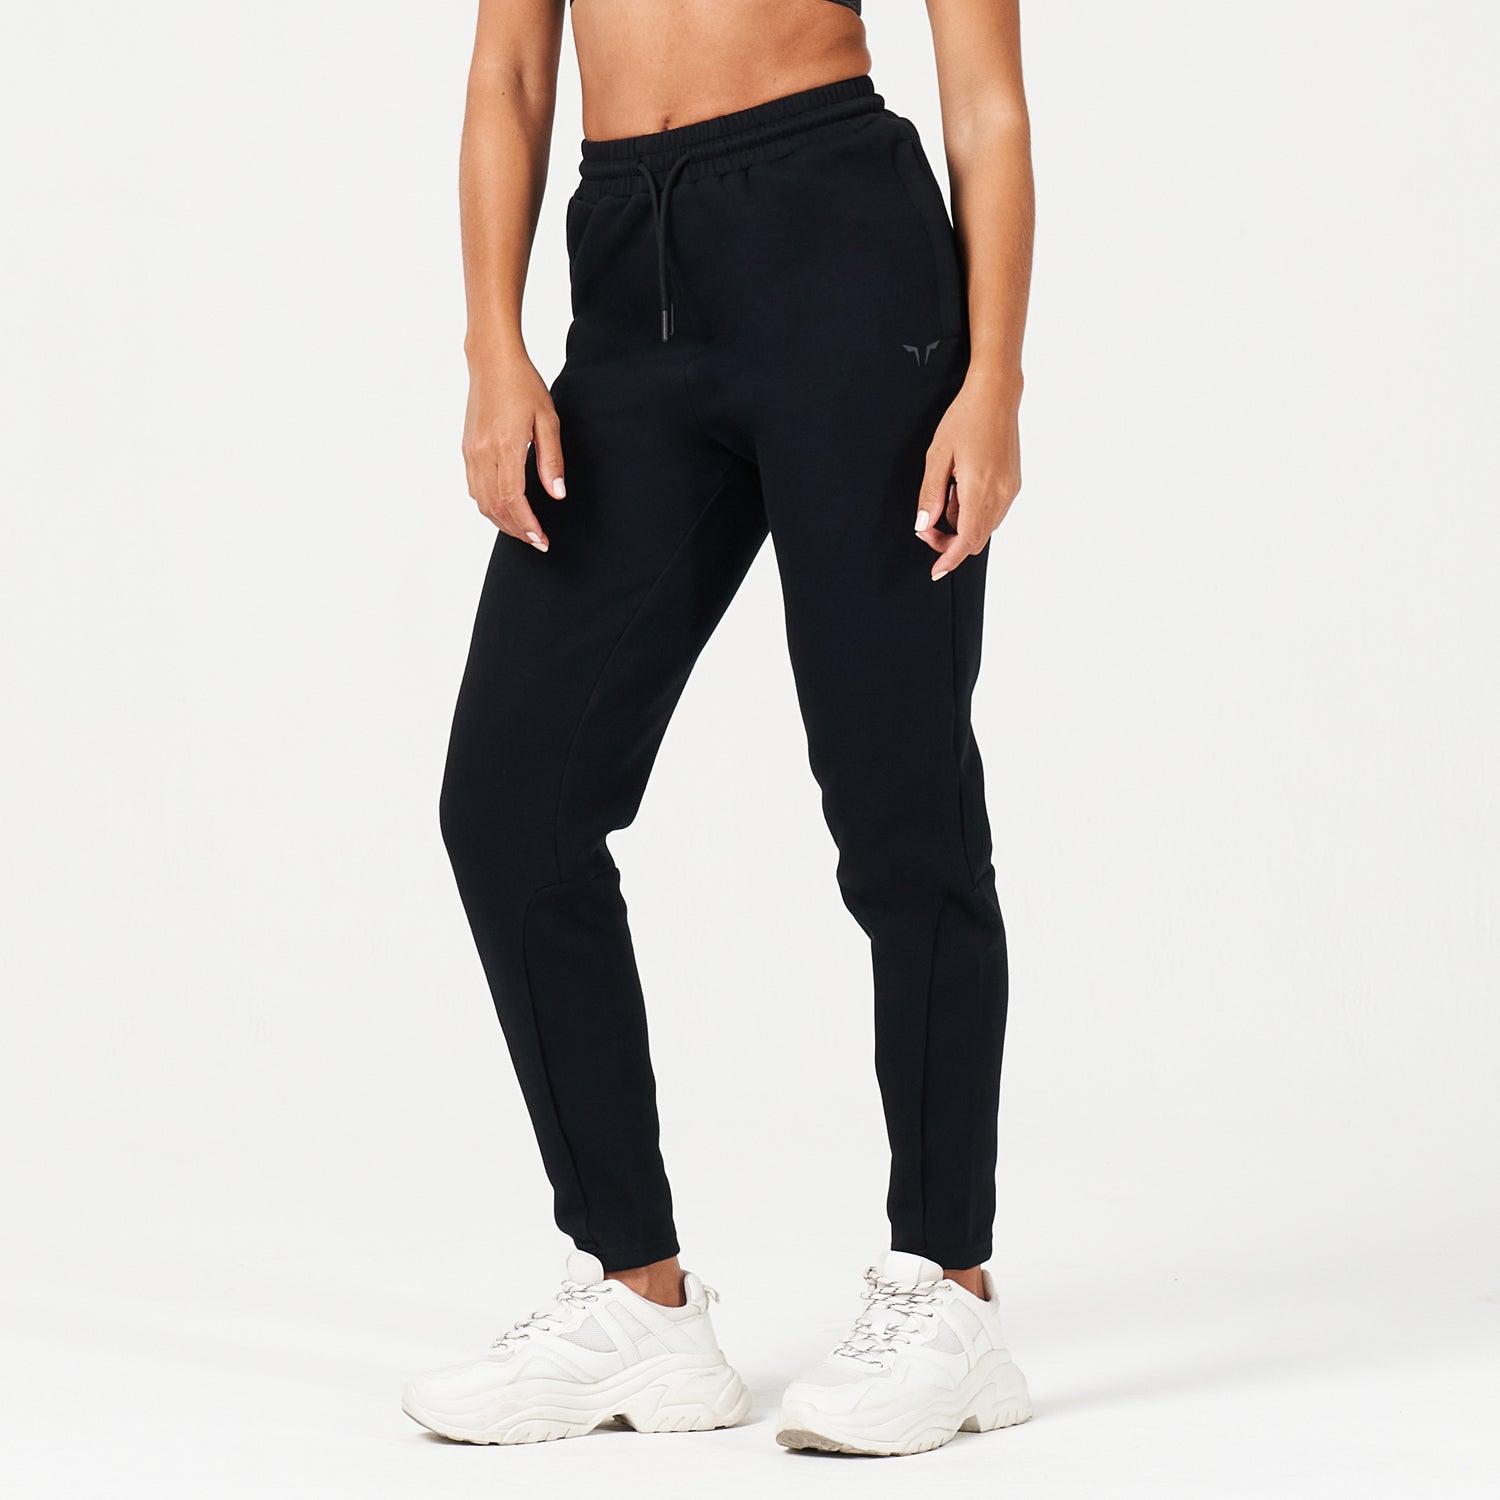 AE, Lab360° Tapered Joggers - Black, Workout Pants Women